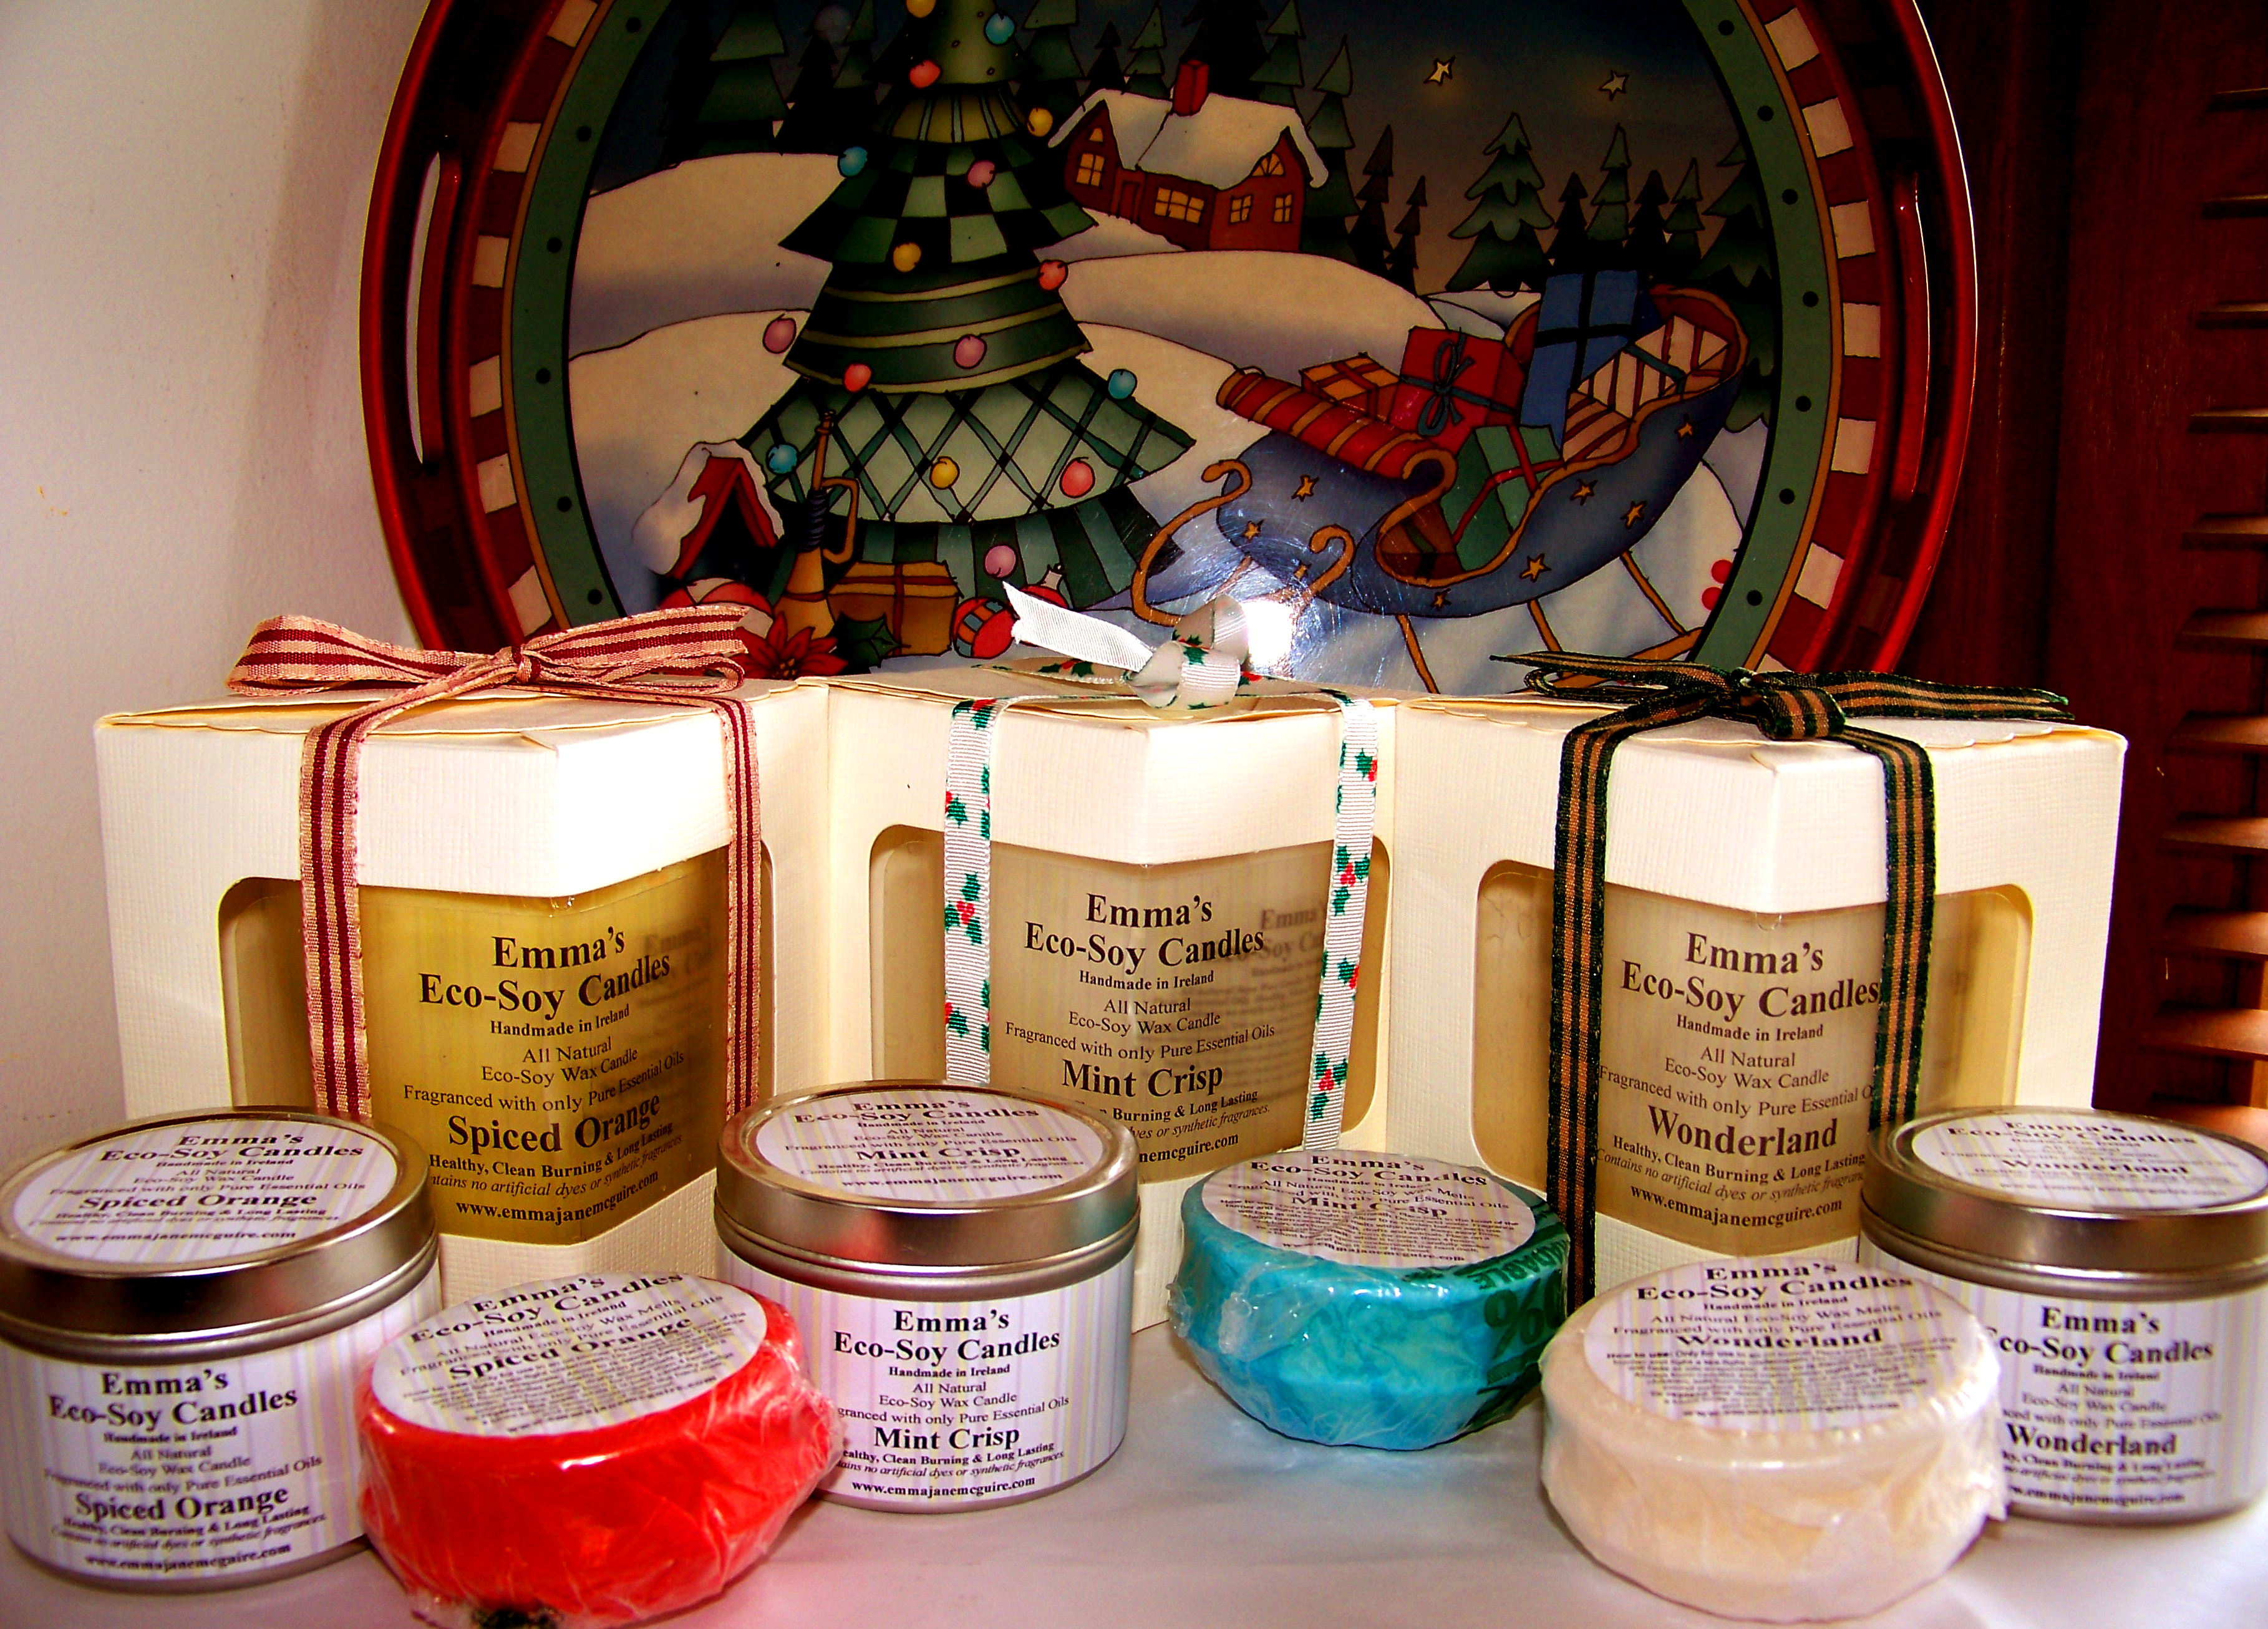 Emma's Eco-Soy Candles Xmass Collection 2012